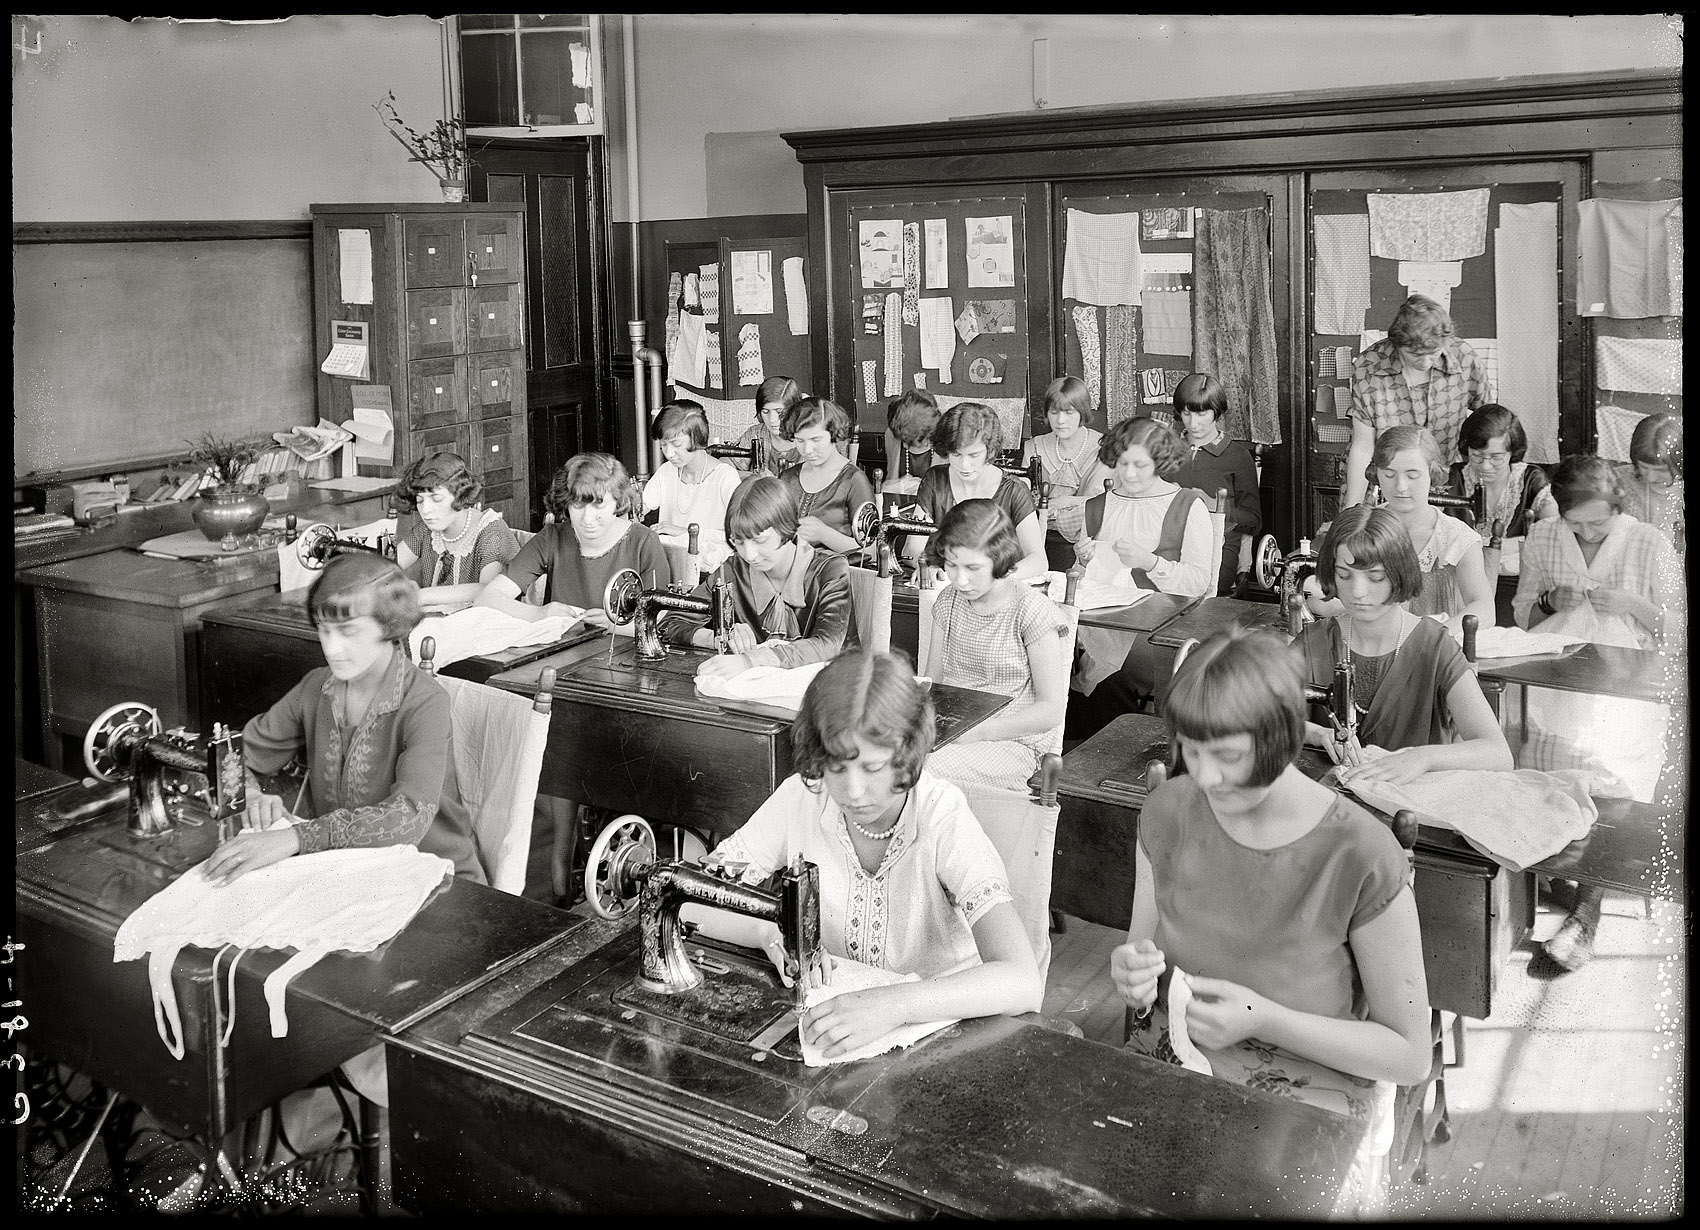 New York, June 1925. "Girls' sewing class." The making of America's home- makers. 5x7 glass negative, George Grantham Bain Collection. View full size.